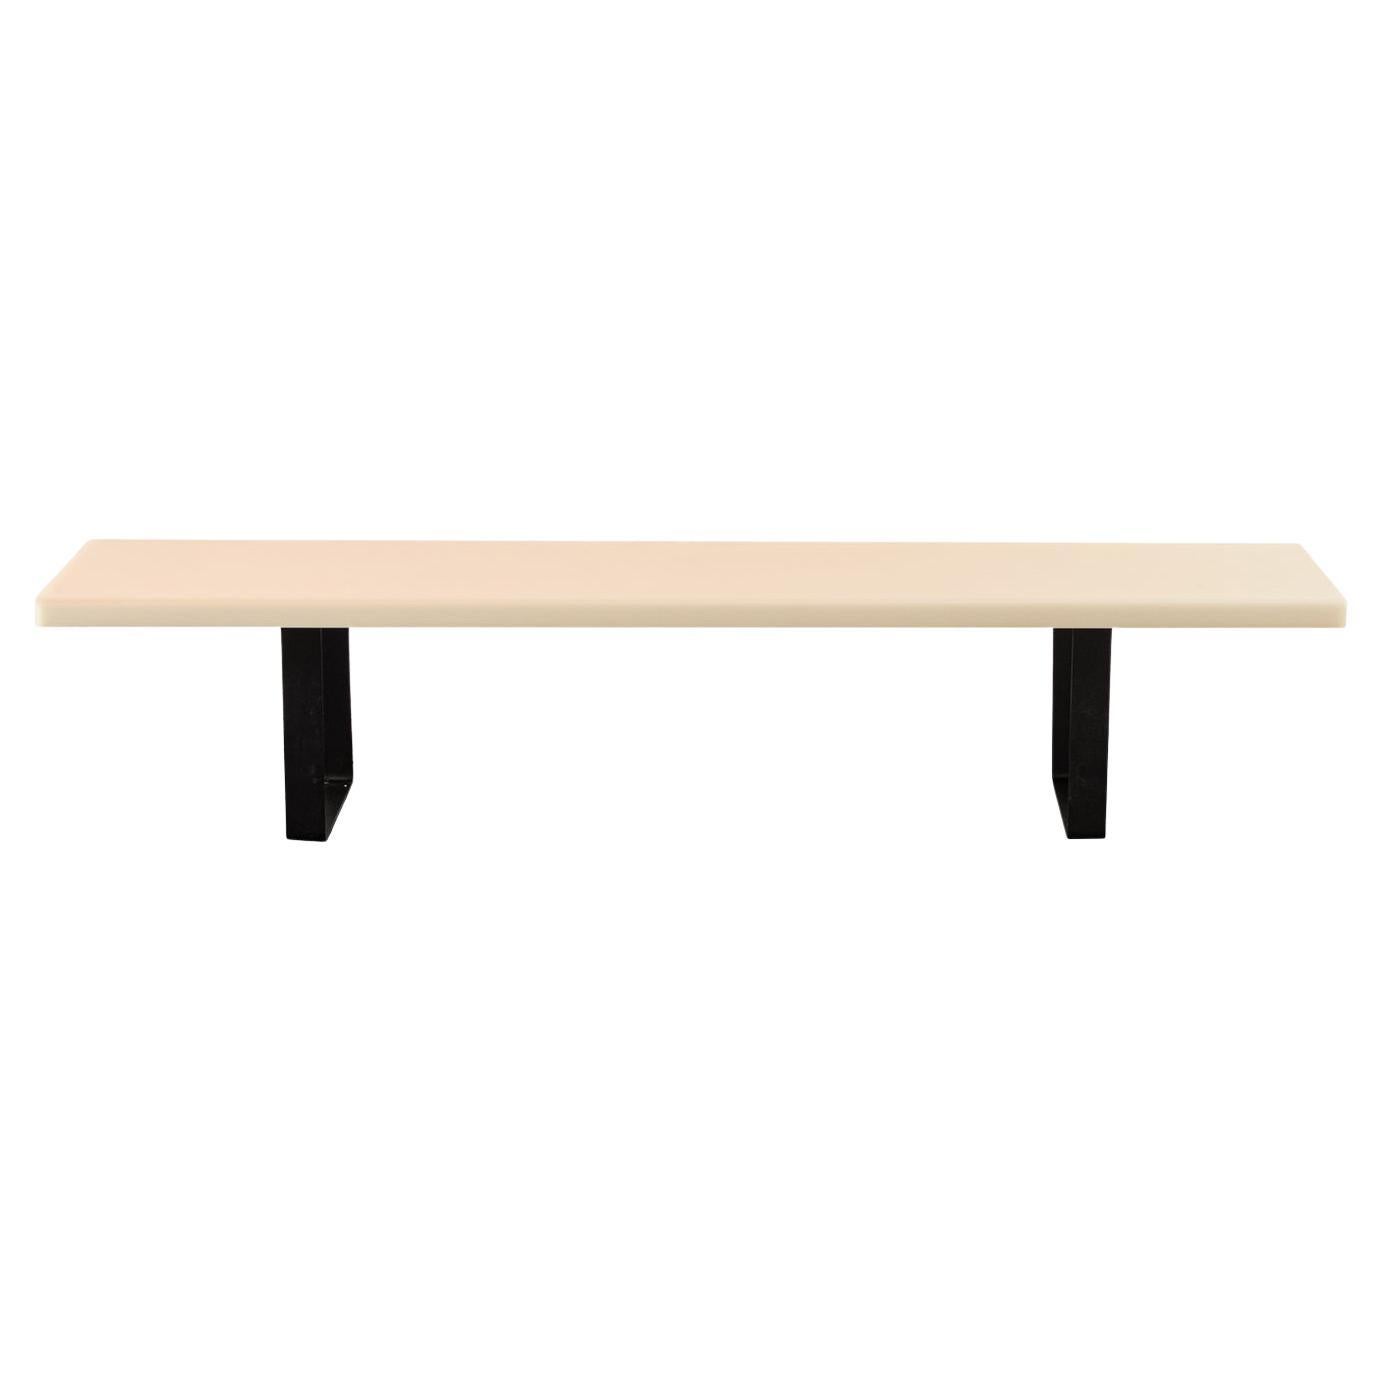 Tone Resin Bench/Seating Light Beige by Facture, REP by Tuleste Factory